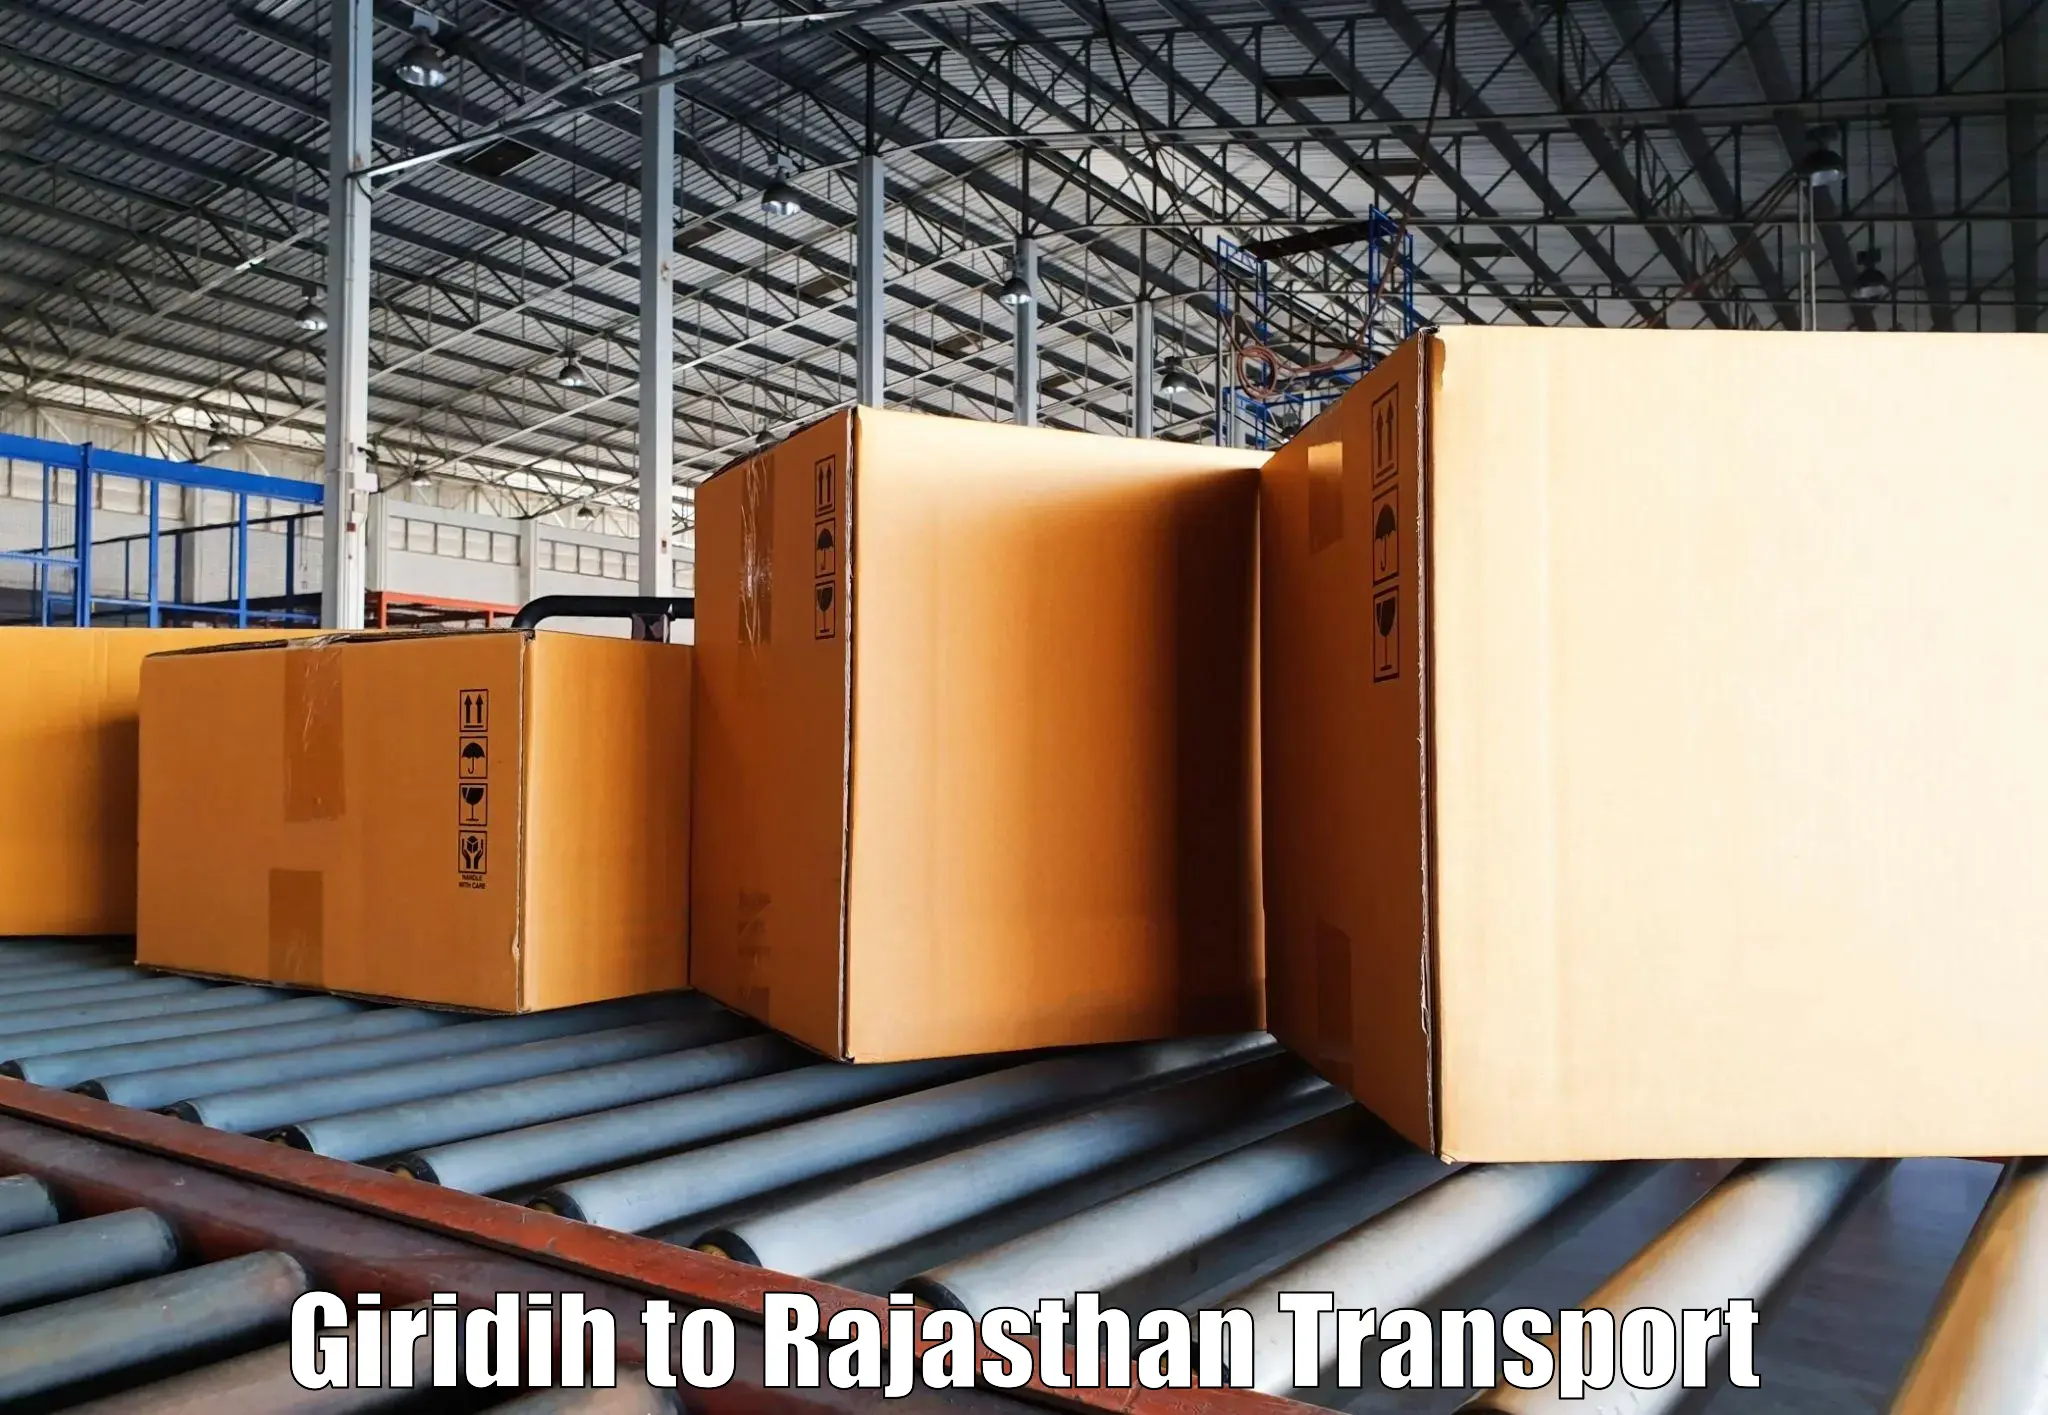 Nearby transport service Giridih to Rajasthan